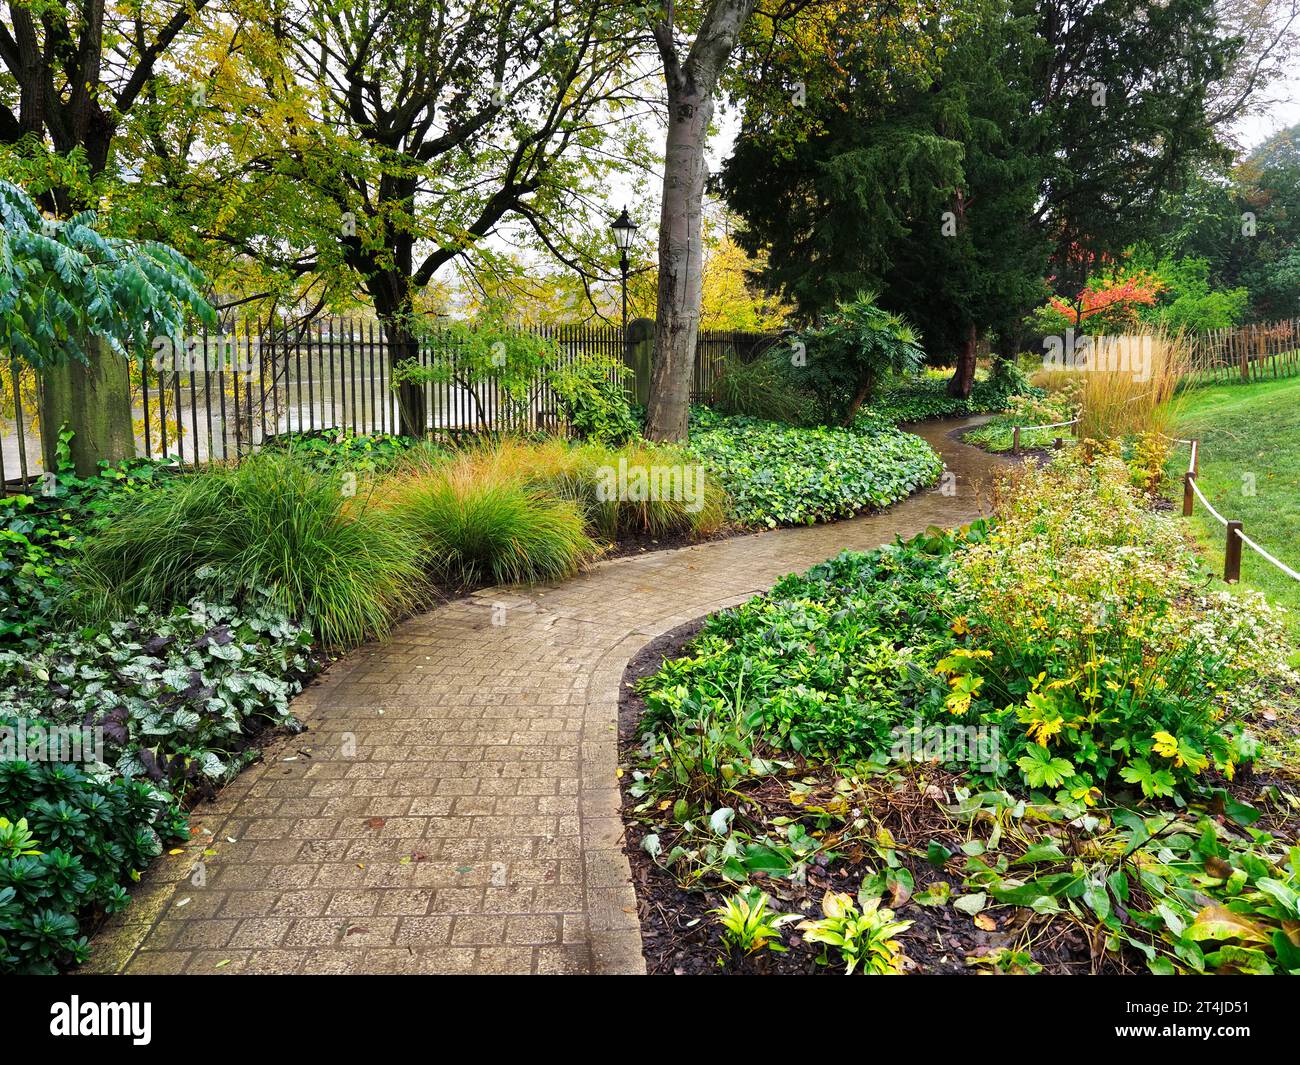 Paved path curving through planting in flowers beds in Museum Gardens City of York Yorkshire England Stock Photo